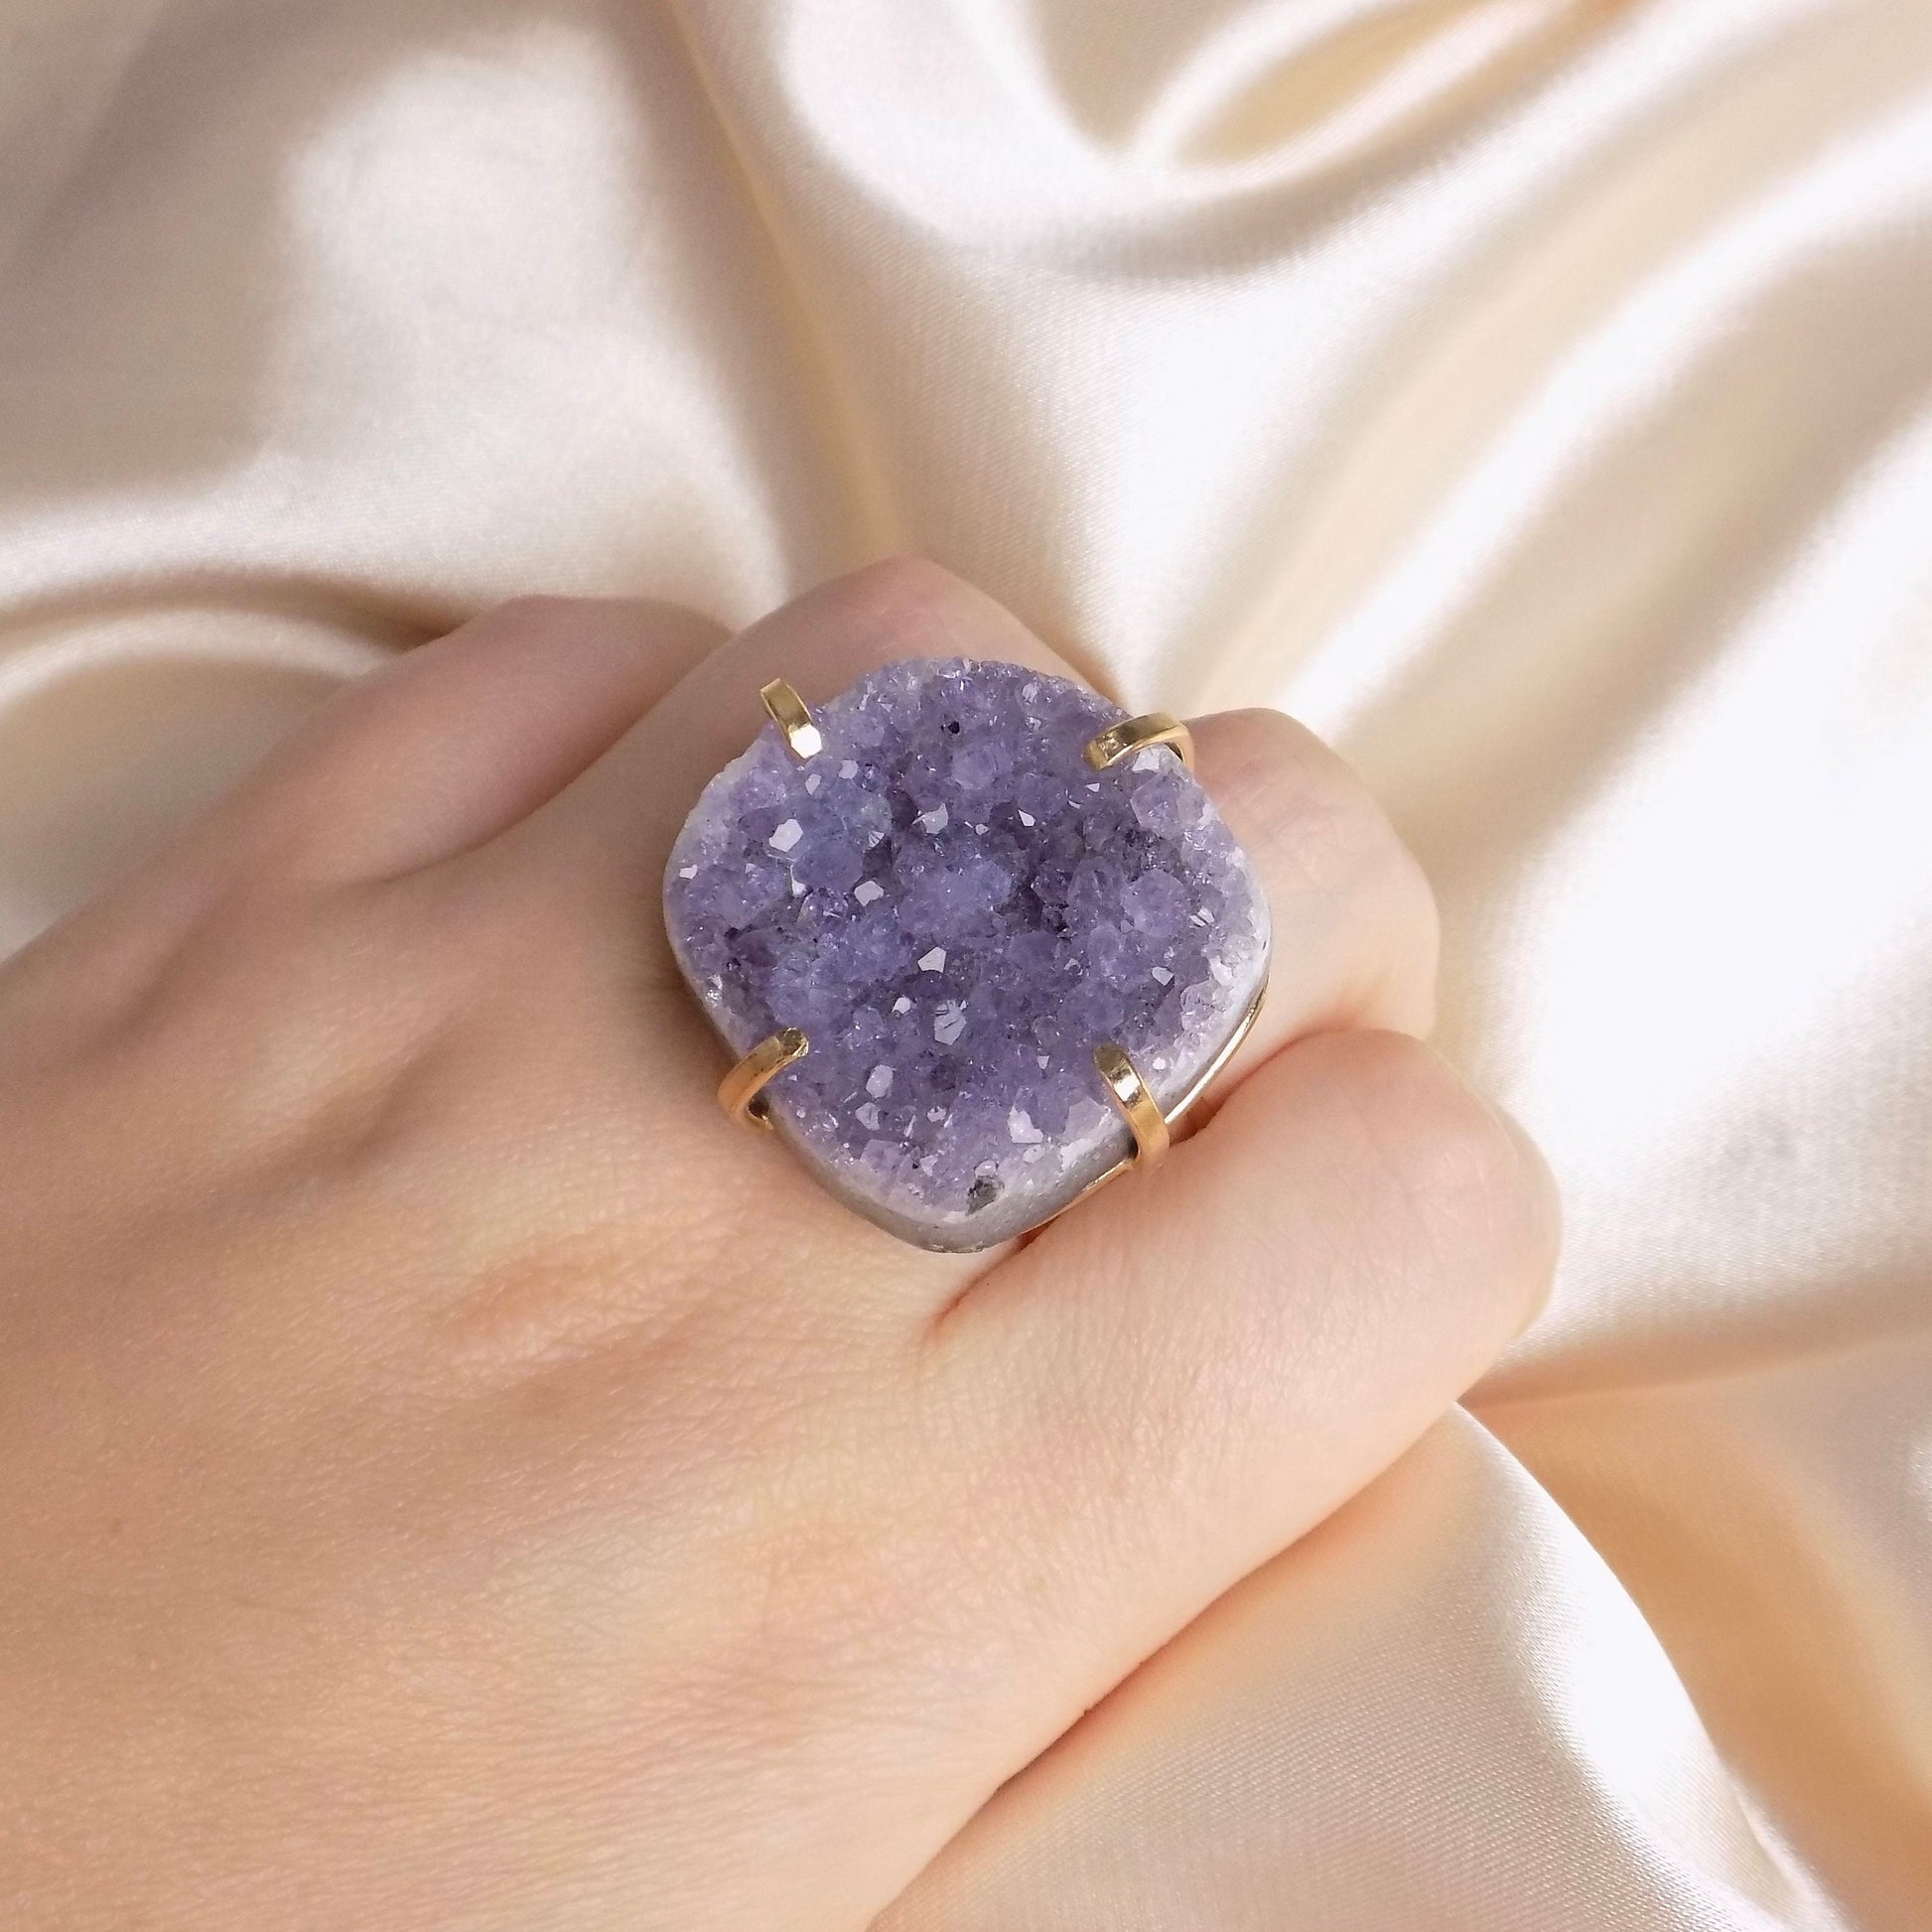 Large Amethyst Ring Gold Adjustable, Purple Raw Druzy Ring For Women, Statement Crystal Ring, Christmas Gift Women, G15-149